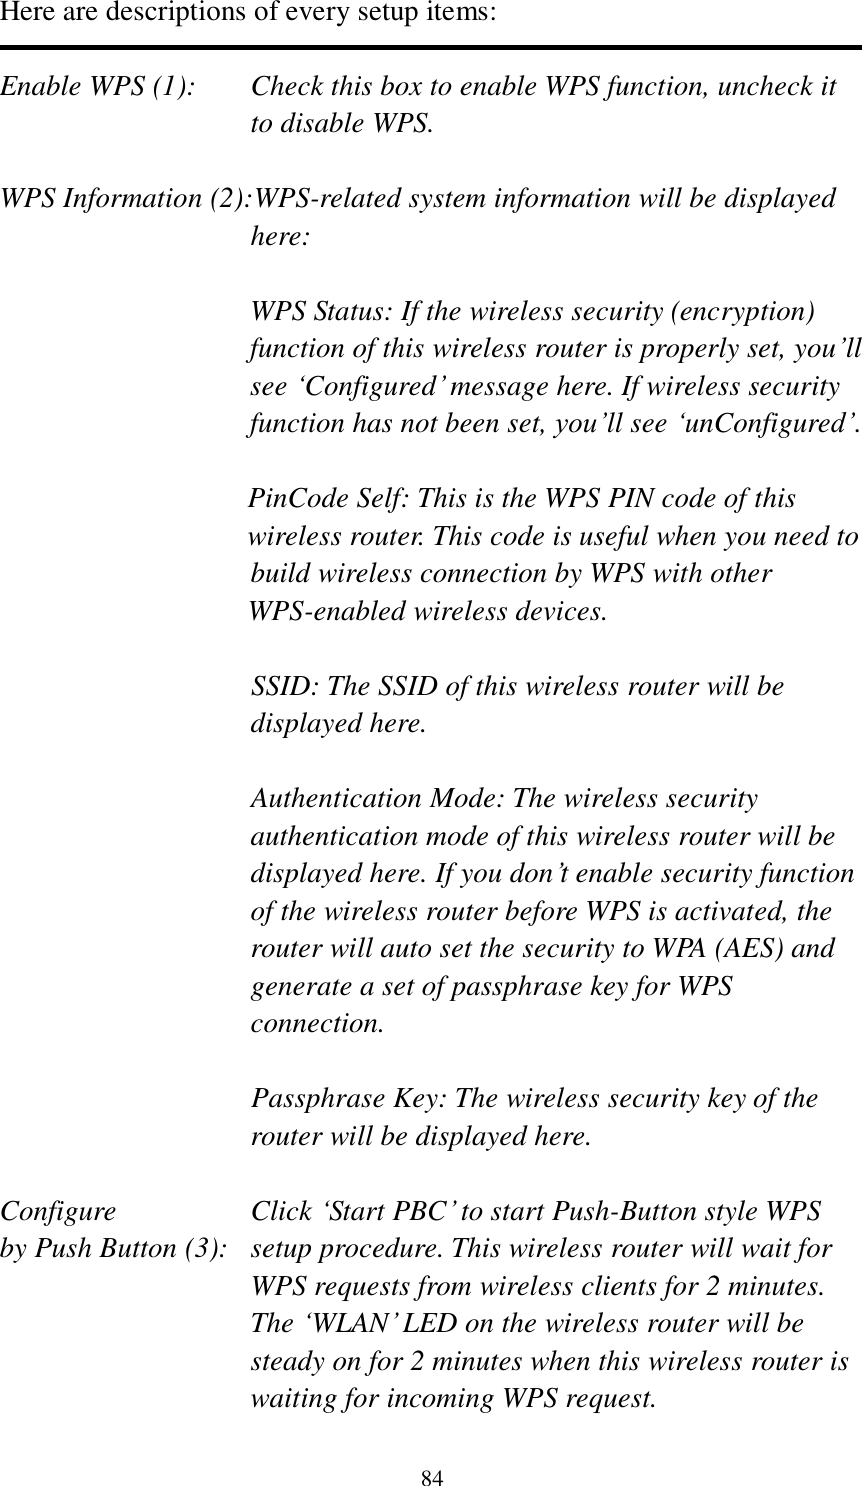 84 Here are descriptions of every setup items:  Enable WPS (1):  Check this box to enable WPS function, uncheck it to disable WPS.  WPS Information (2):WPS-related system information will be displayed here:  WPS Status: If the wireless security (encryption) function of this wireless router is properly set, you‟ll see „Configured‟ message here. If wireless security function has not been set, you‟ll see „unConfigured‟.  PinCode Self: This is the WPS PIN code of this wireless router. This code is useful when you need to  build wireless connection by WPS with other WPS-enabled wireless devices.  SSID: The SSID of this wireless router will be displayed here.  Authentication Mode: The wireless security authentication mode of this wireless router will be displayed here. If you don‟t enable security function of the wireless router before WPS is activated, the router will auto set the security to WPA (AES) and generate a set of passphrase key for WPS connection.  Passphrase Key: The wireless security key of the router will be displayed here.  Configure      Click „Start PBC‟ to start Push-Button style WPS by Push Button (3):  setup procedure. This wireless router will wait for WPS requests from wireless clients for 2 minutes. The „WLAN‟ LED on the wireless router will be steady on for 2 minutes when this wireless router is waiting for incoming WPS request. 